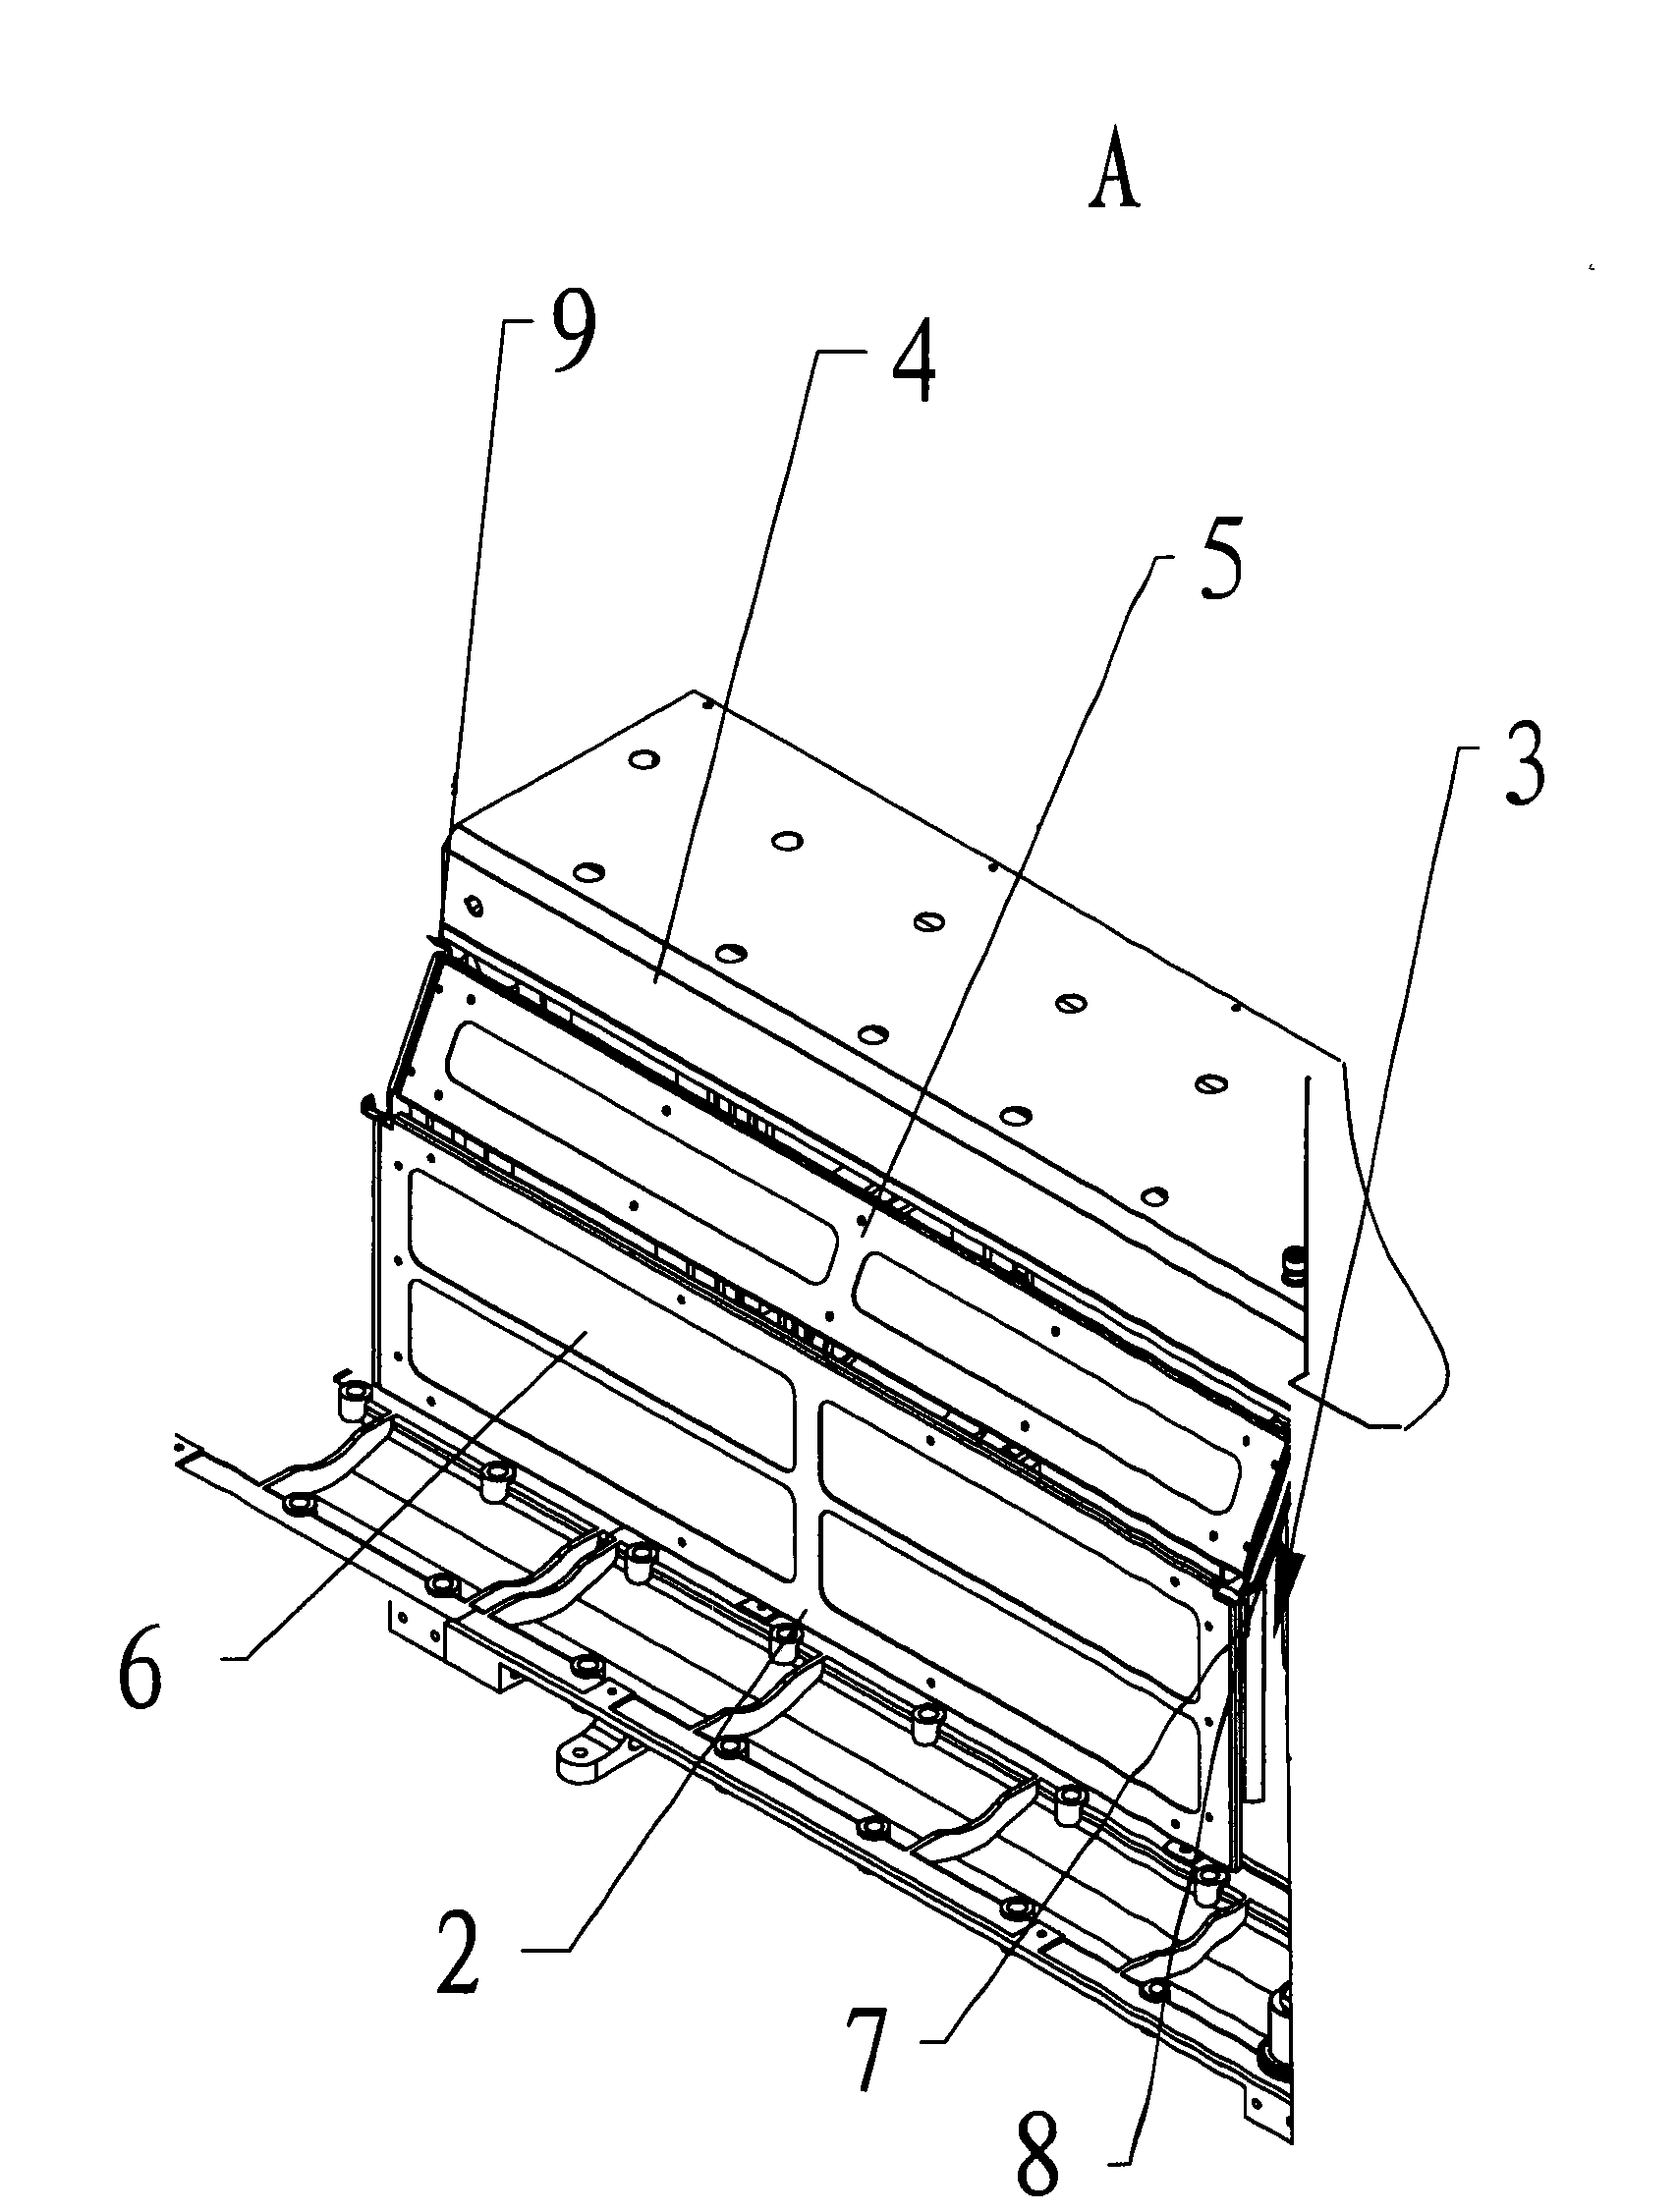 Flyer shield structure of roving machine